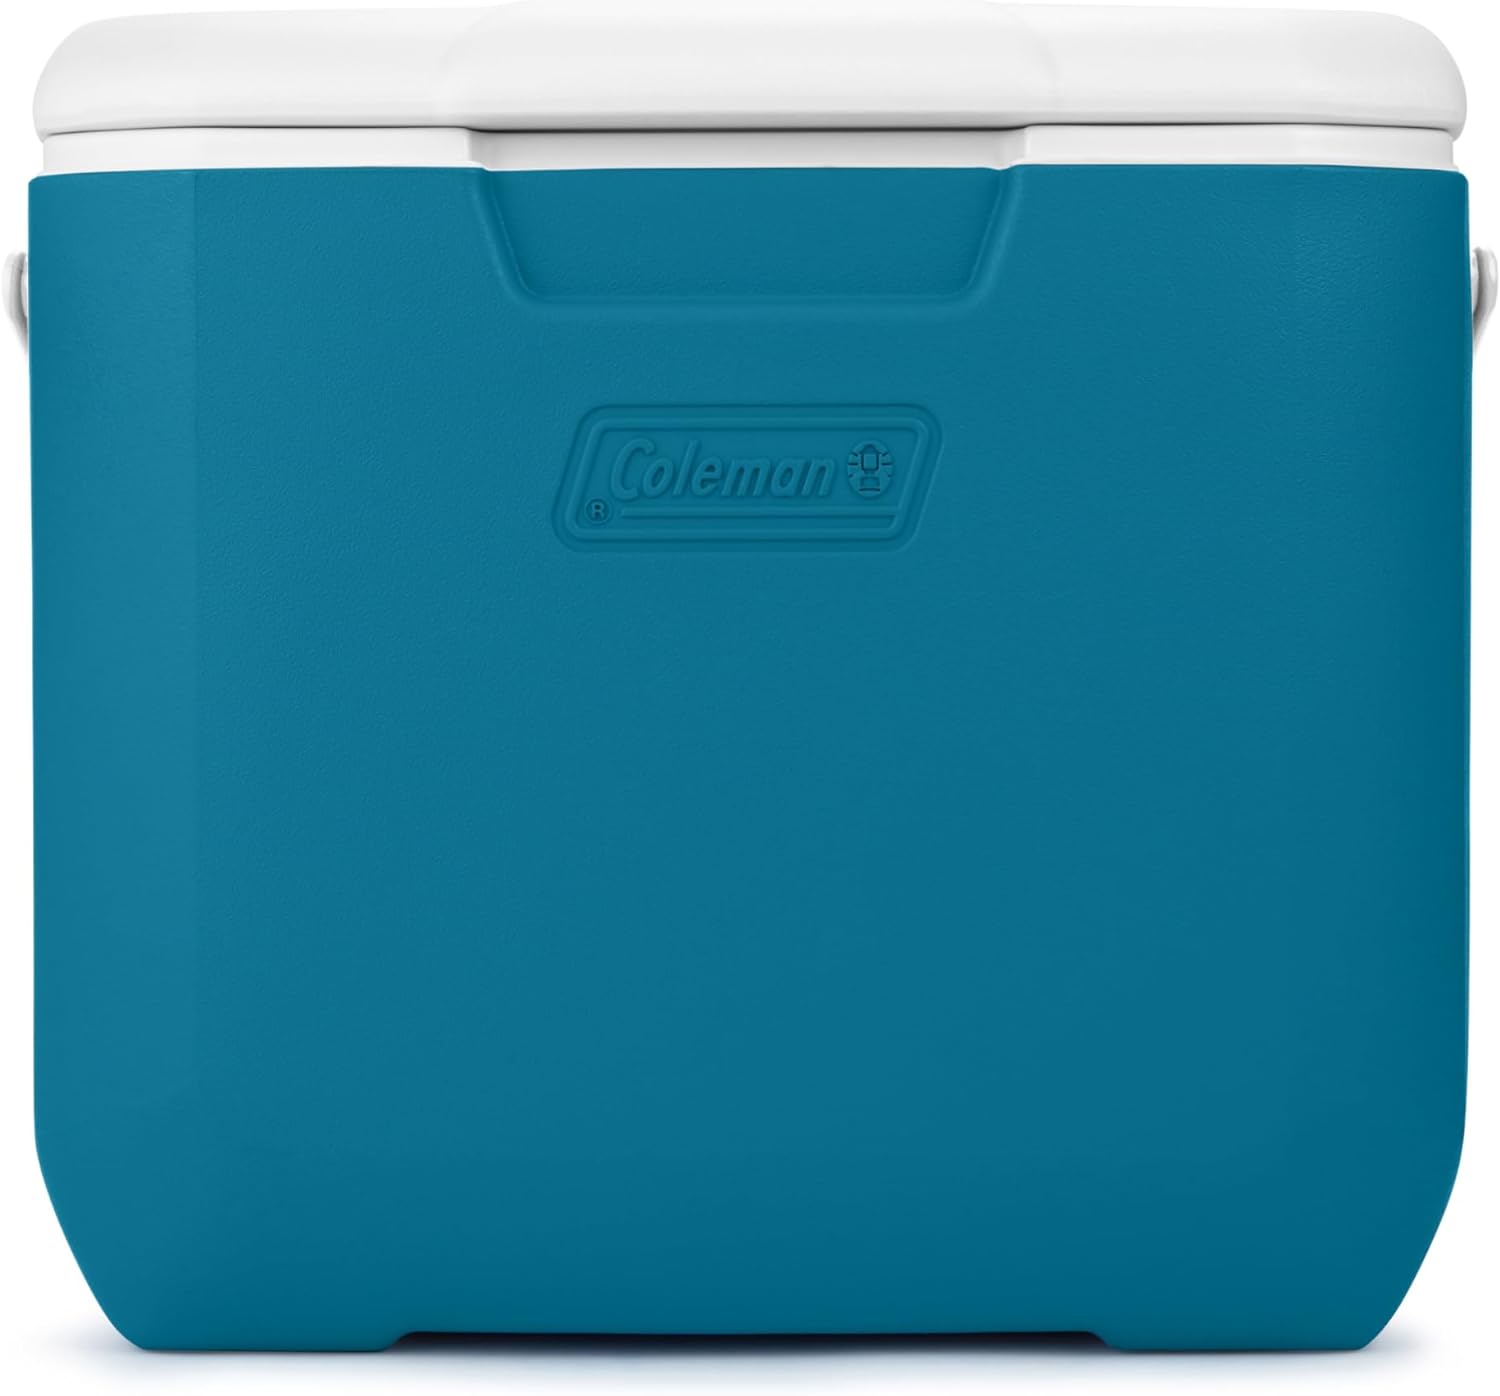 Coleman Chiller Series 30qt Insulated Portable Cooler, Hard Cooler with Ice Retention & Heavy-Duty Handle, Great for Beach, Picnic, Camping, Tailgating, Groceries, Boating & More